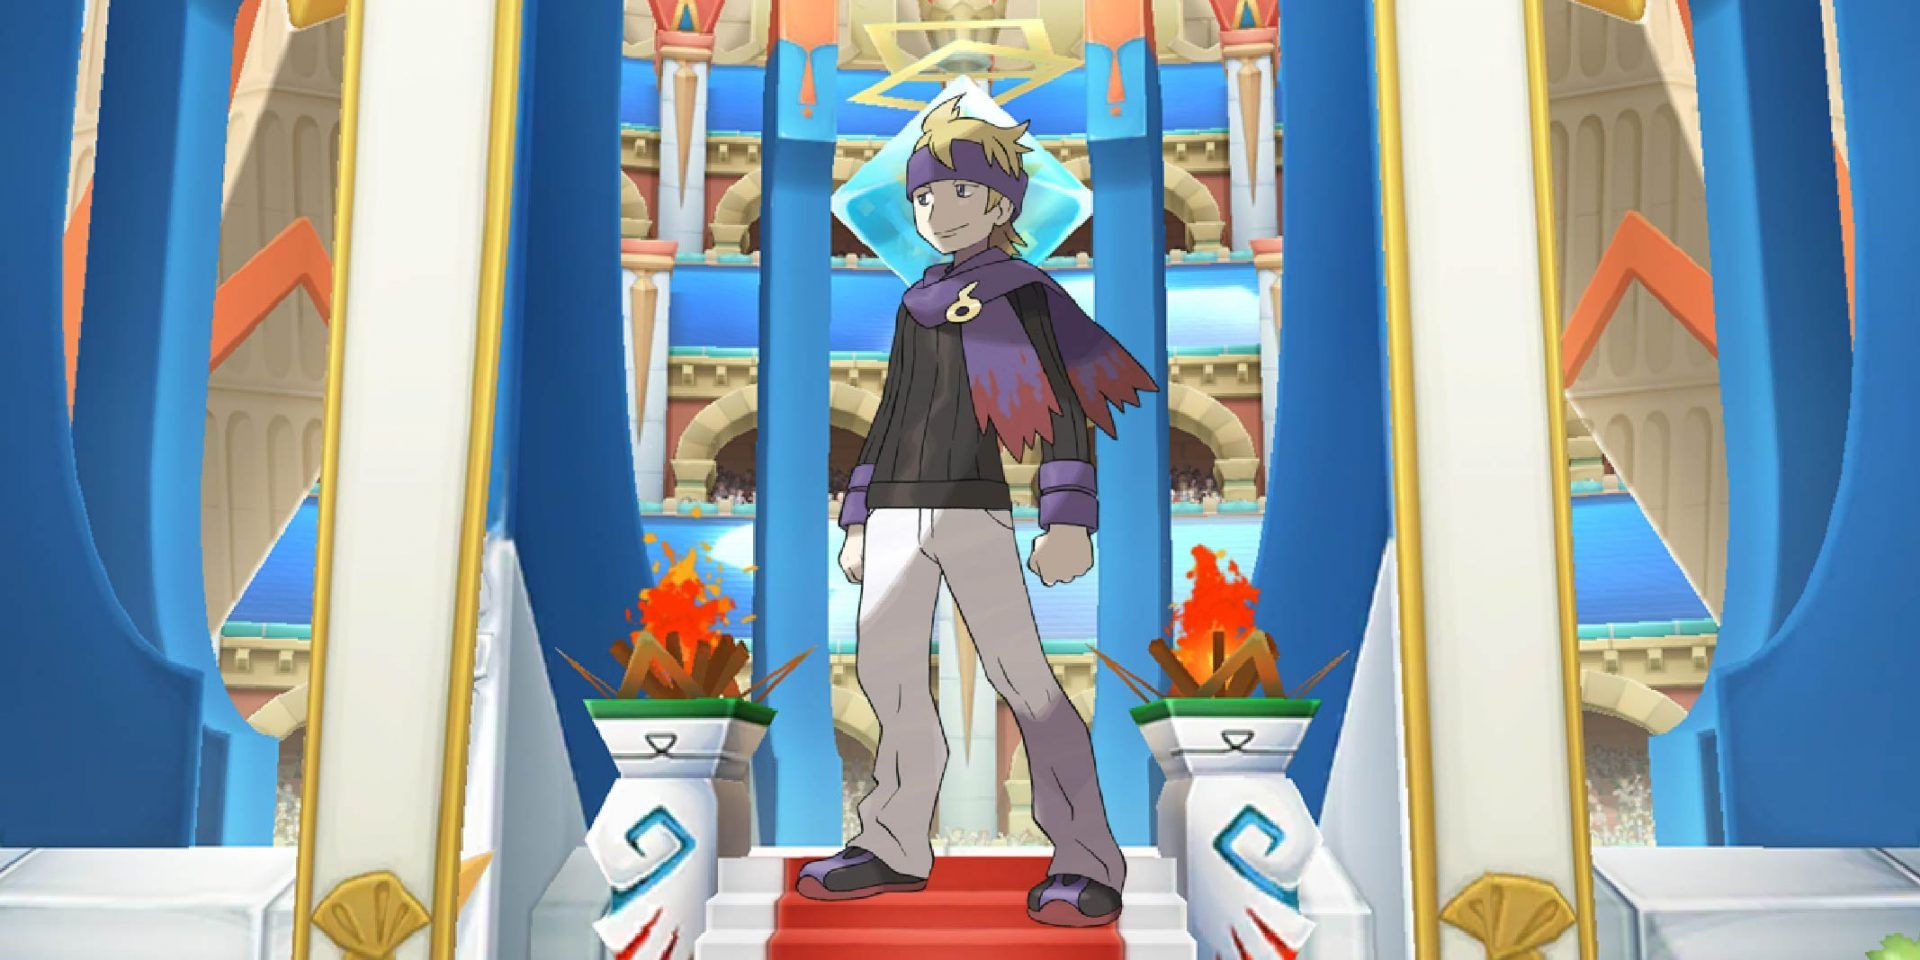 Morty from Pokémon standing against an arena backdrop.